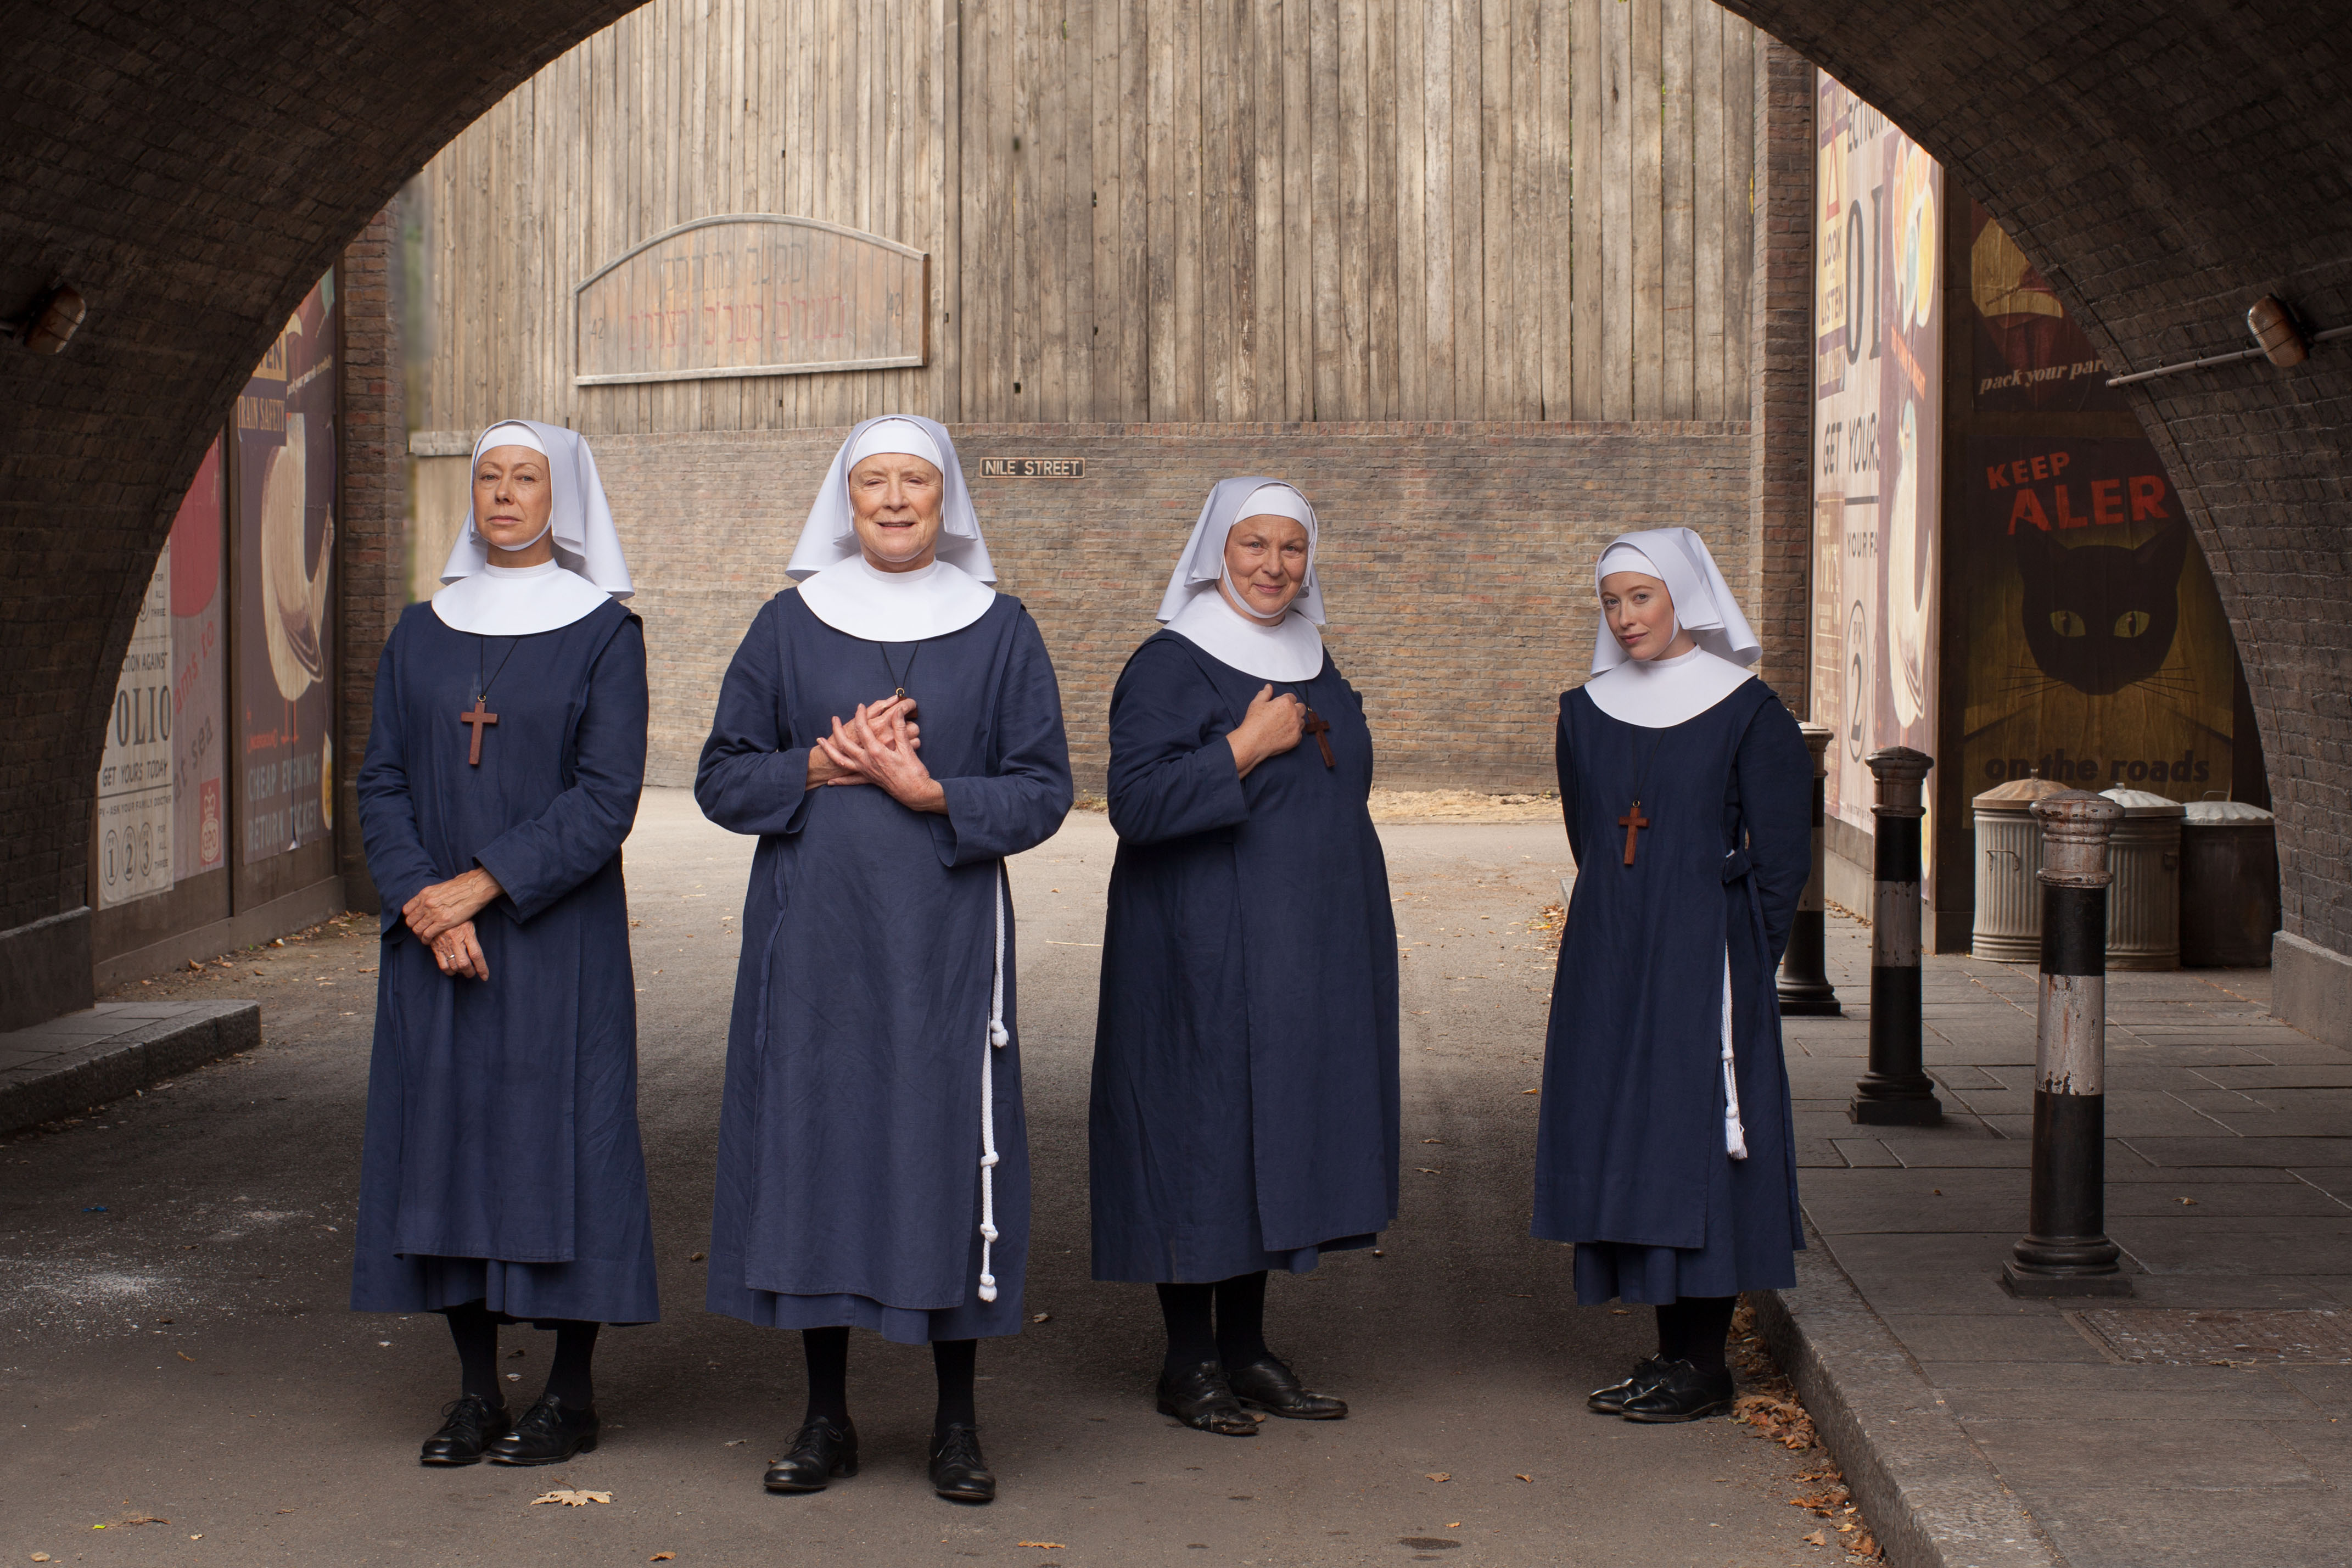 The sisters. (Photo: Courtesy of Laurence Cendrowicz/Neal Street Productions 2013)